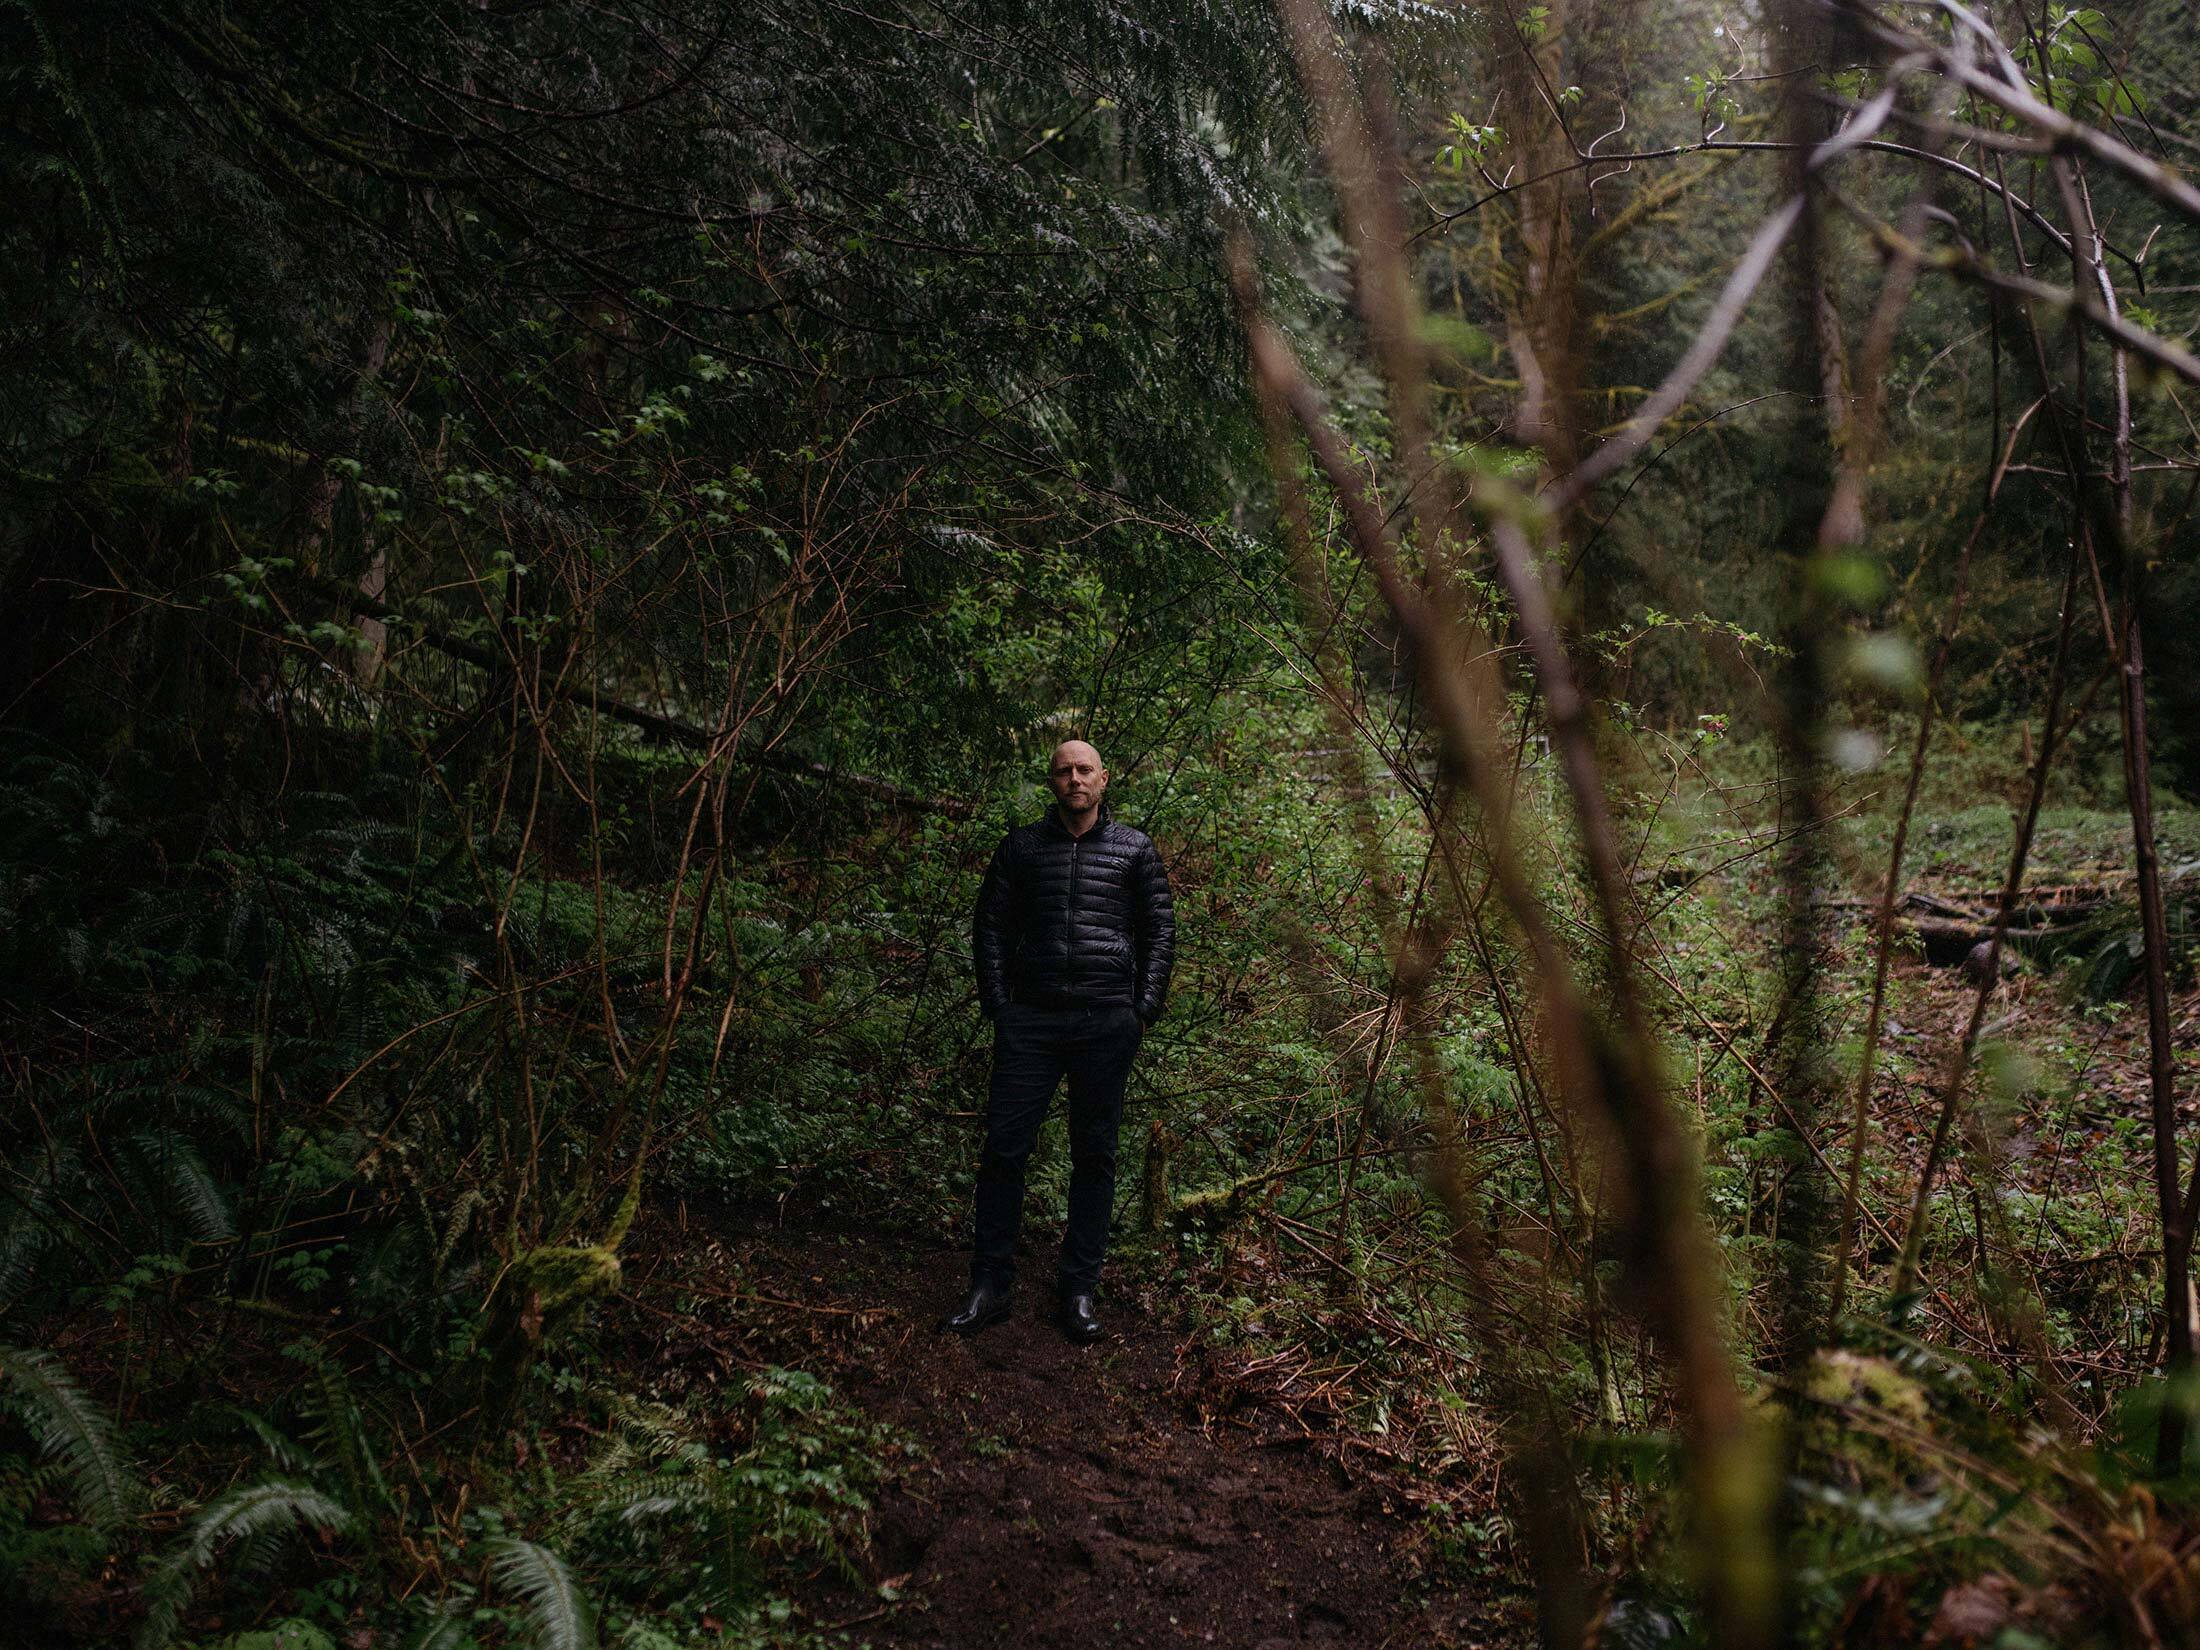 Lucas Joppa on a trail at his North Bend, Wash., home in the foothills of the Cascade Mountains. His work-from-home view includes bears and bobcats.